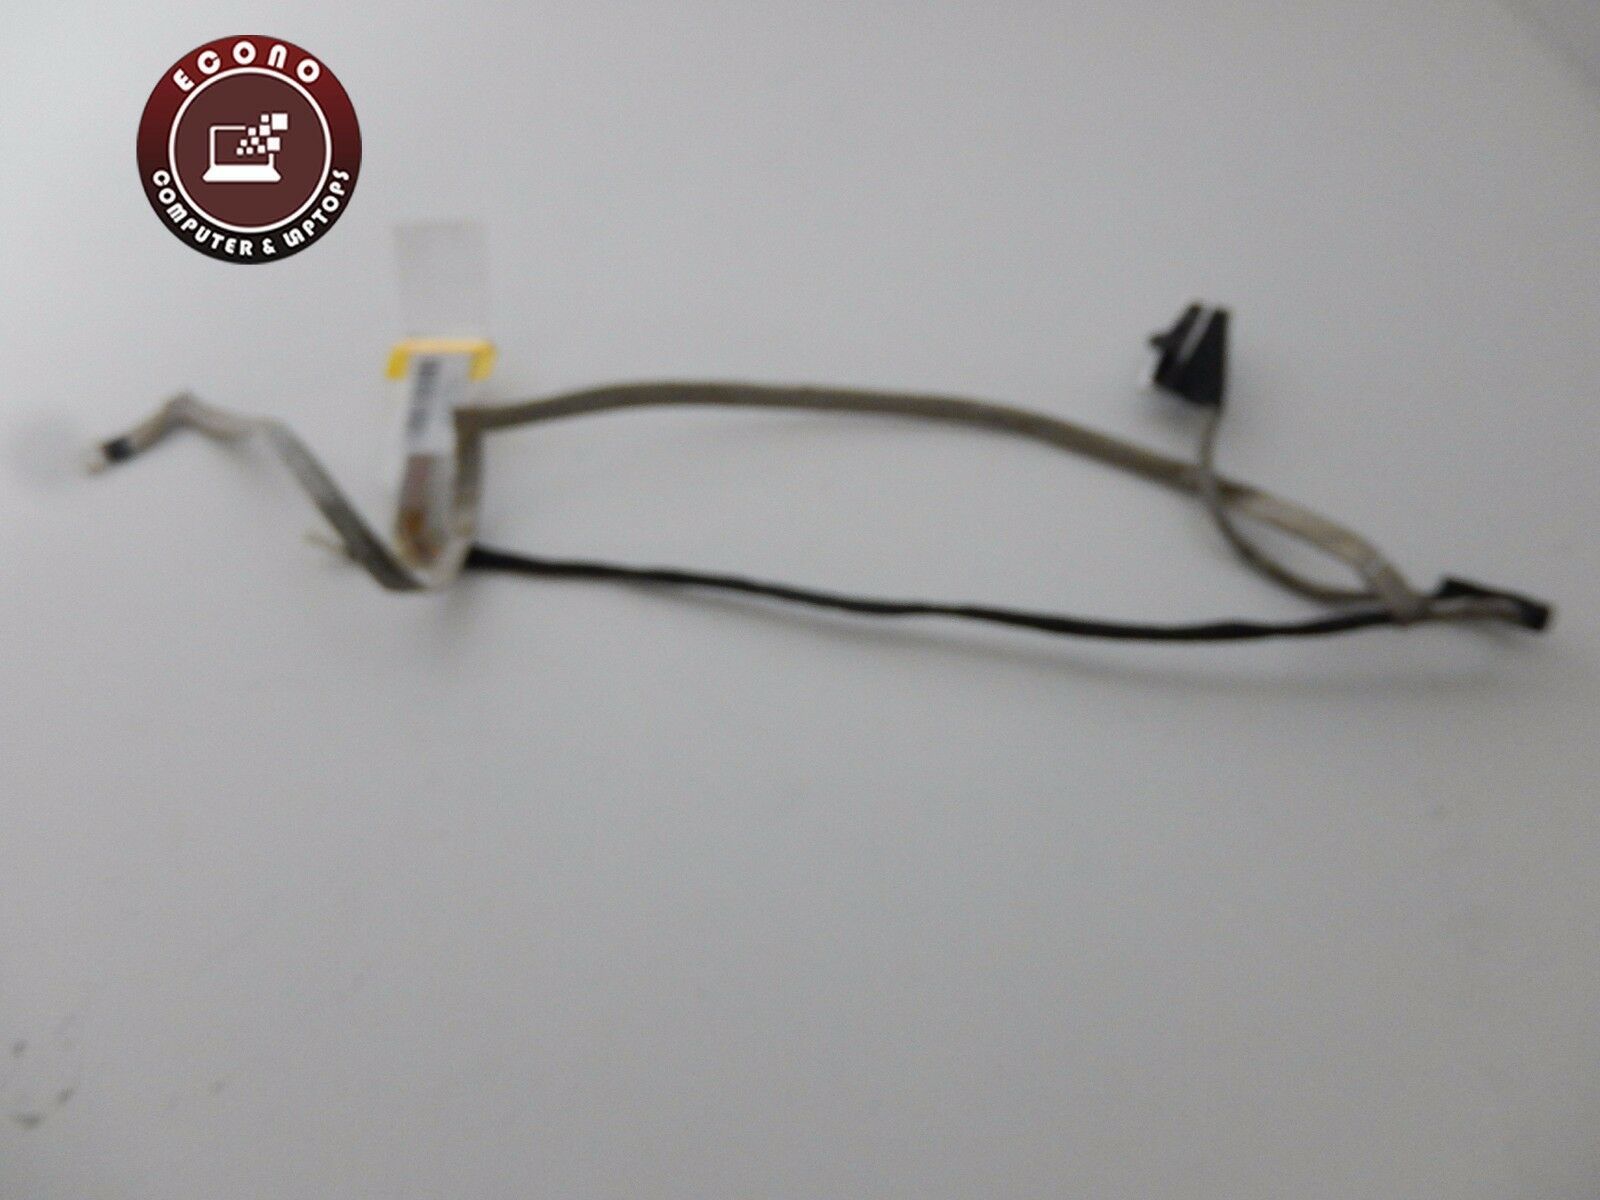 HP Pavilion DV7-4285dx Genuine  LCD Video Cable LX7LC000/ DD0LX7LC000 - $7.16